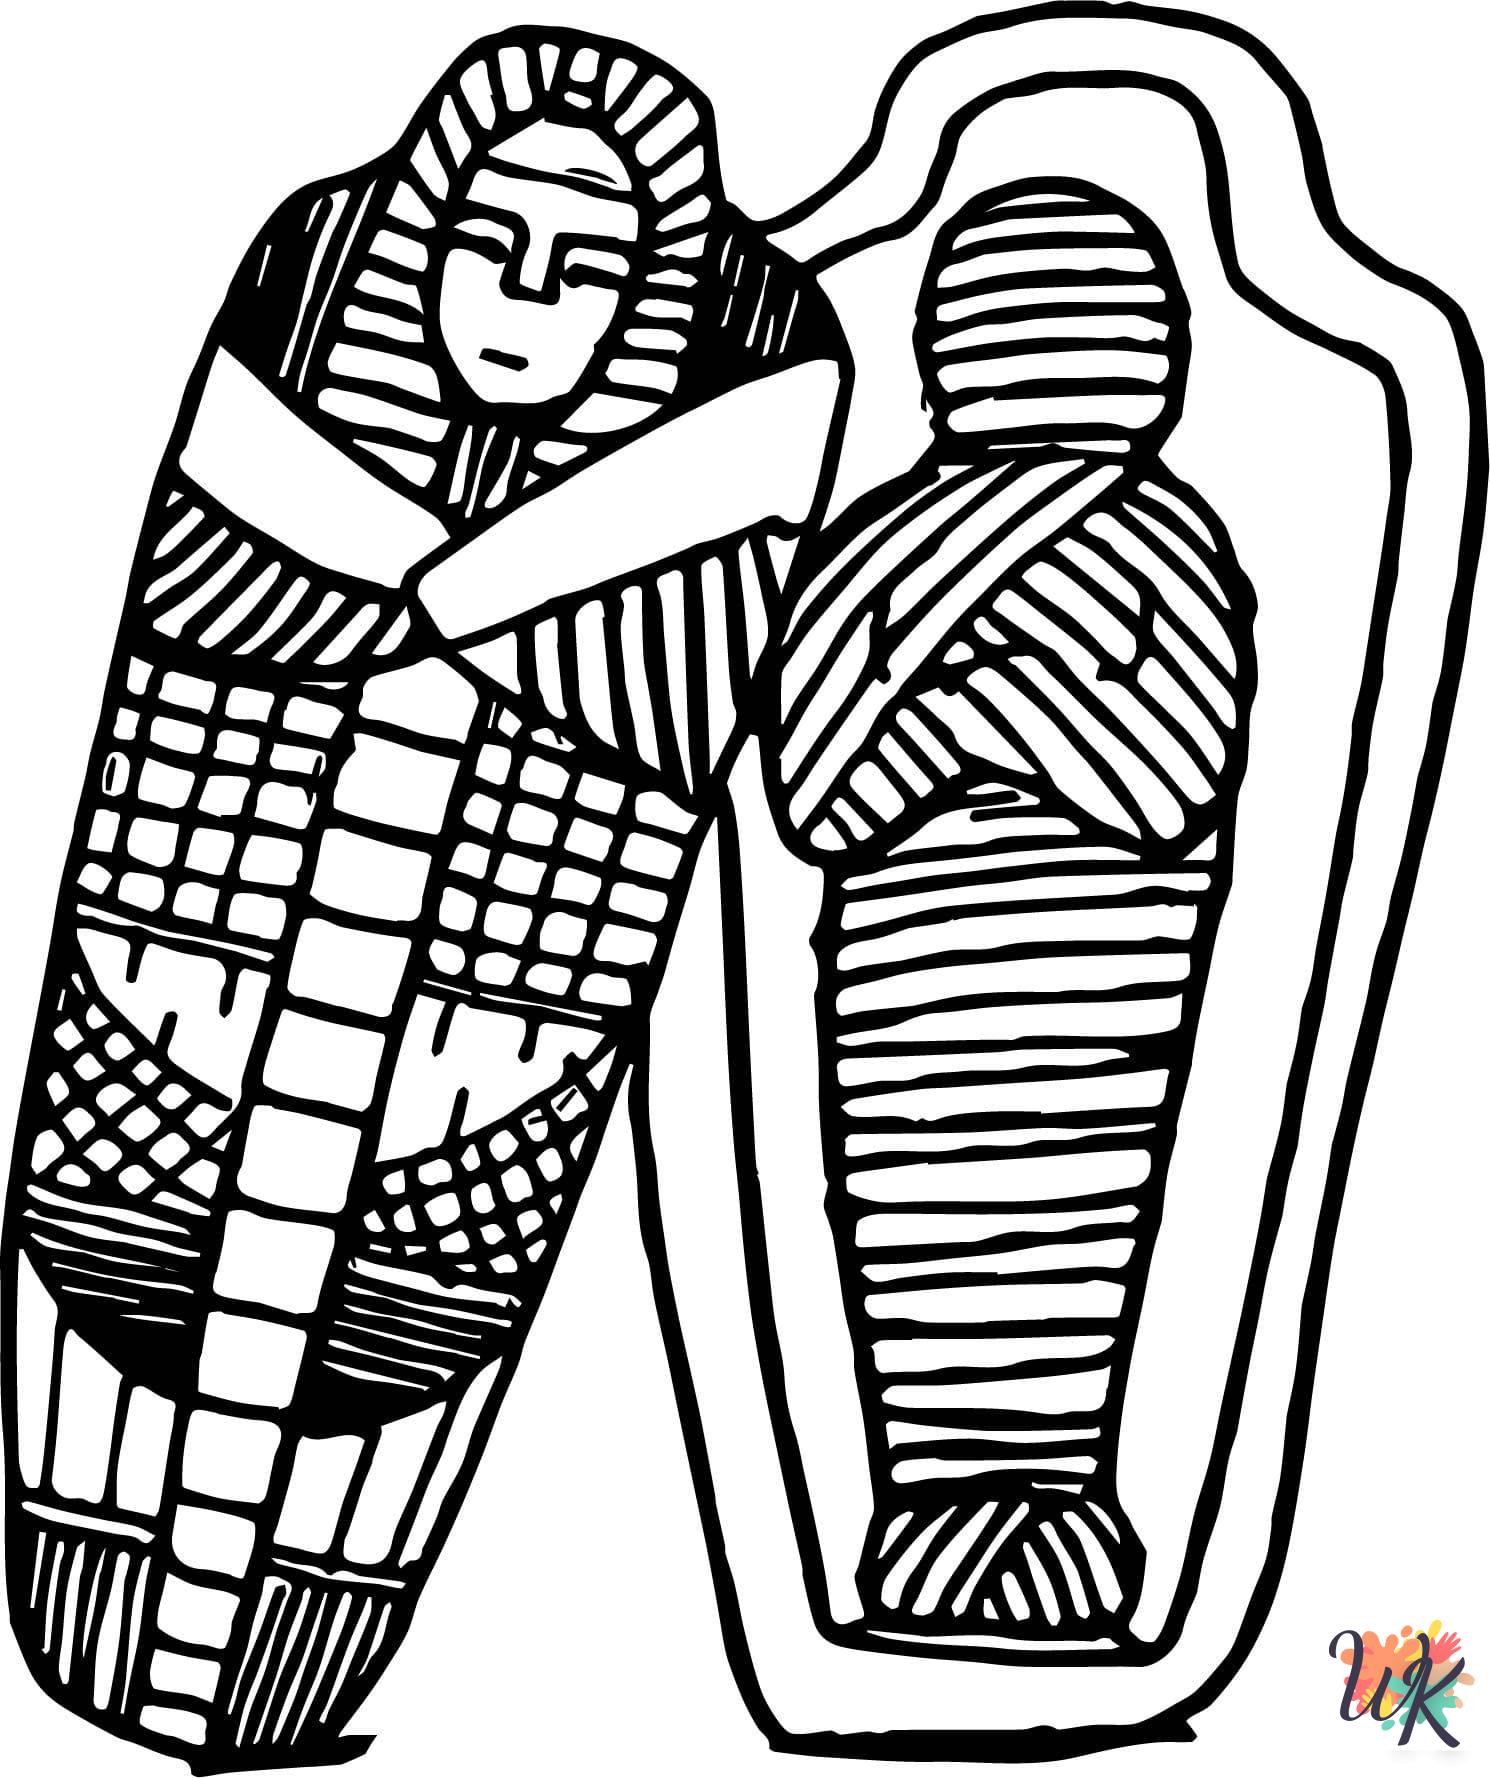 Mummy ornament coloring pages